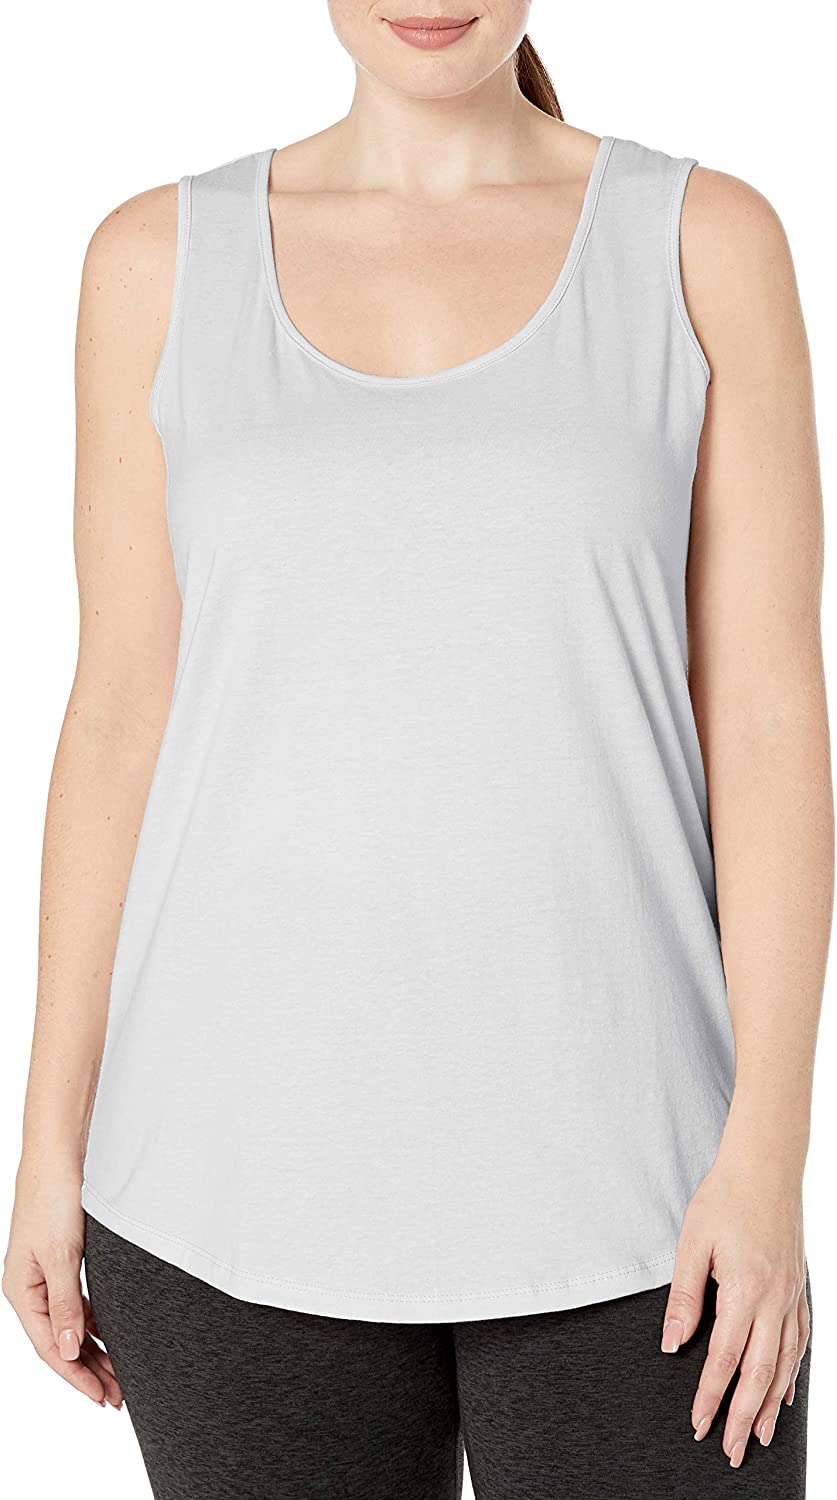 Price:$6.00 Just My Size Women's Plus-Size Shirt-Tail Tank Top at Amazon Women’s Clothing store